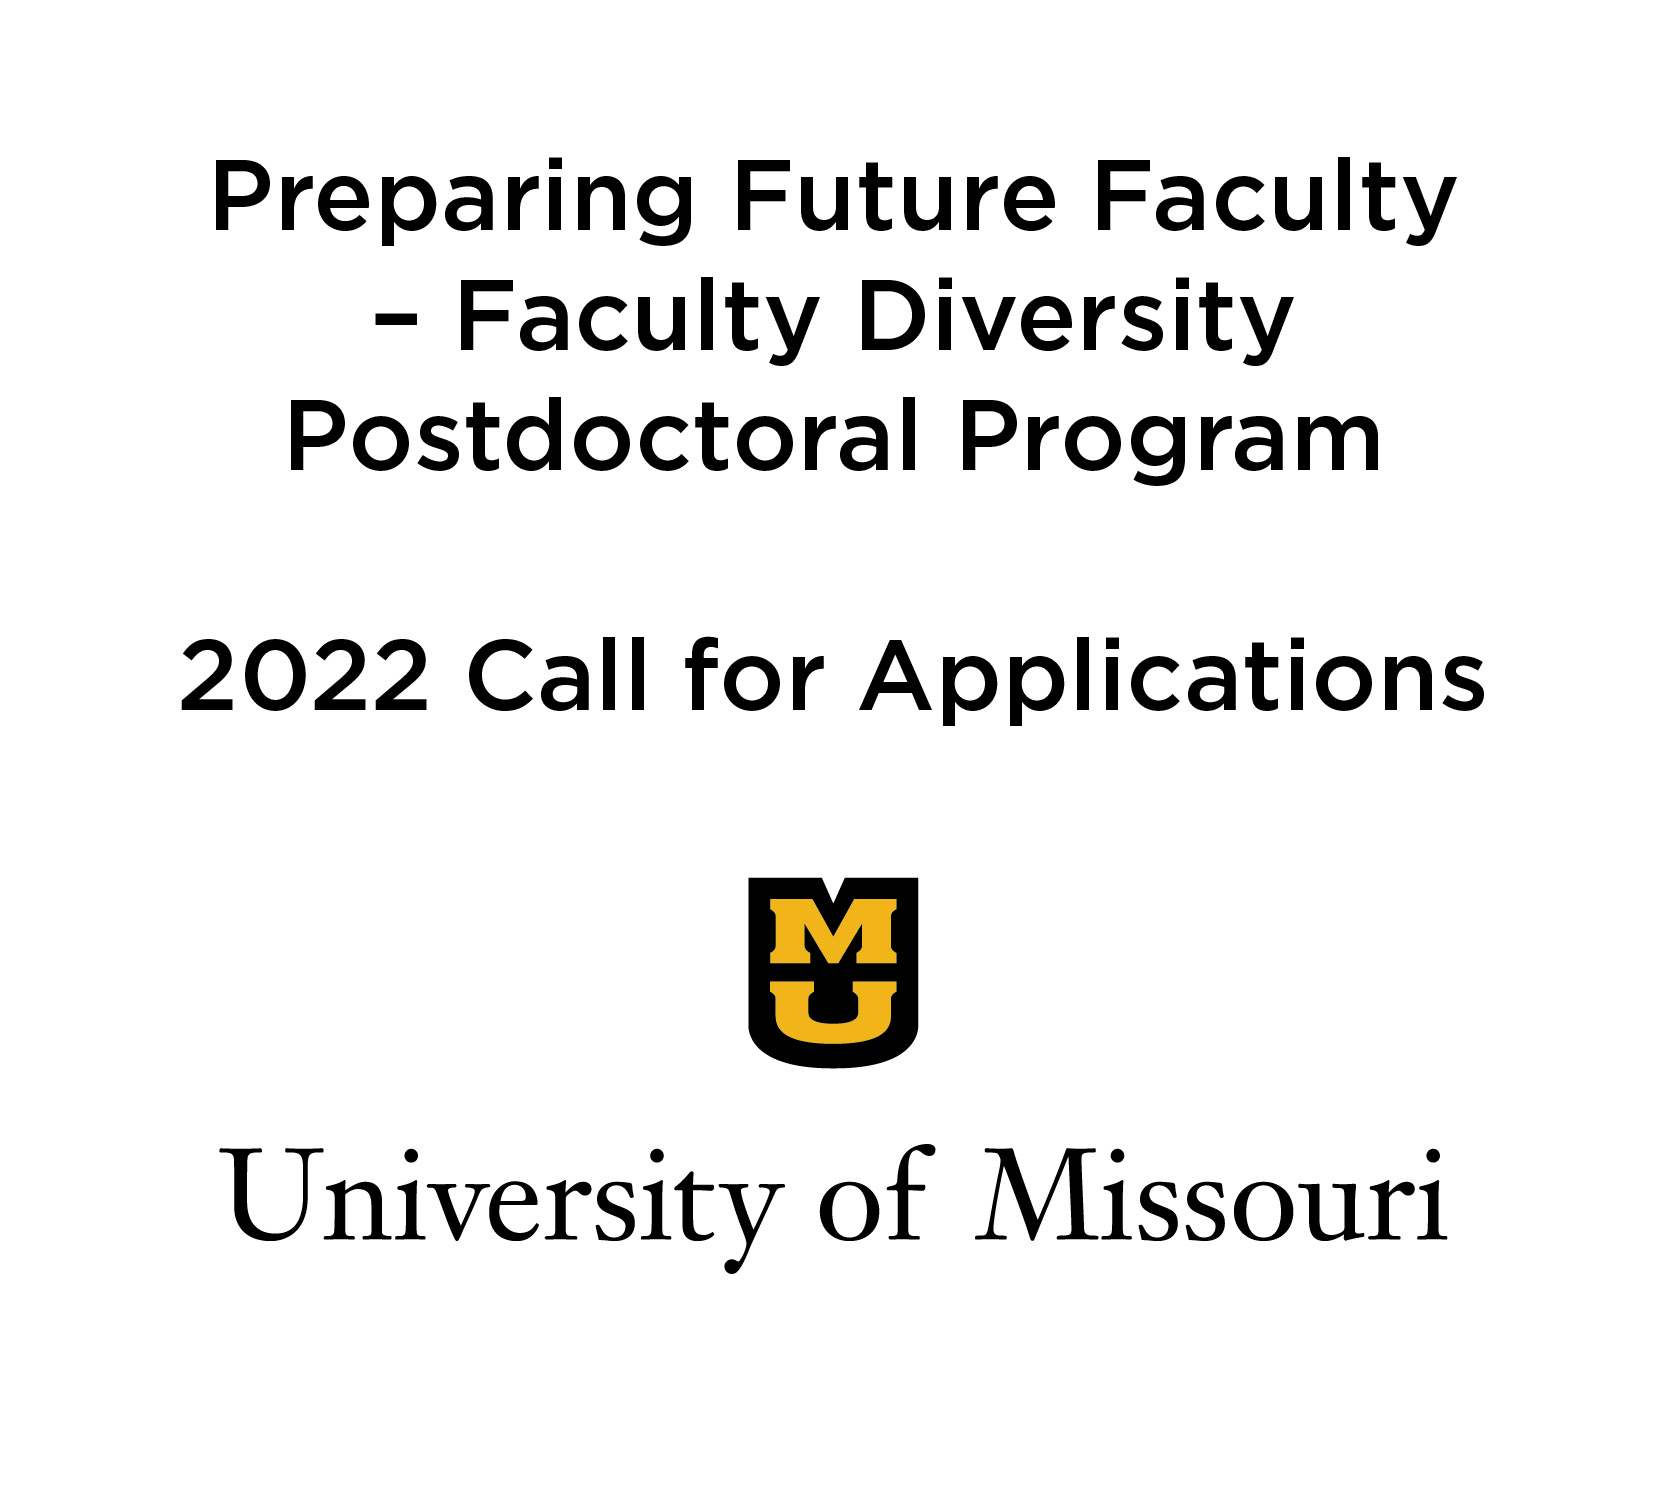 The University of Missouri (MU) has announced its 2022 call for the Preparing Future Faculty – Faculty Diversity (PFFFD) Postdoctoral Program. The PFFFD program is designed to promote and develop scholars for tenure-track faculty positions at the University of Missouri or elsewhere. <br><br><a href=https://ipg.missouri.edu/feature-stories/Postdoc-_09012021.cfm>READ MORE>></a>